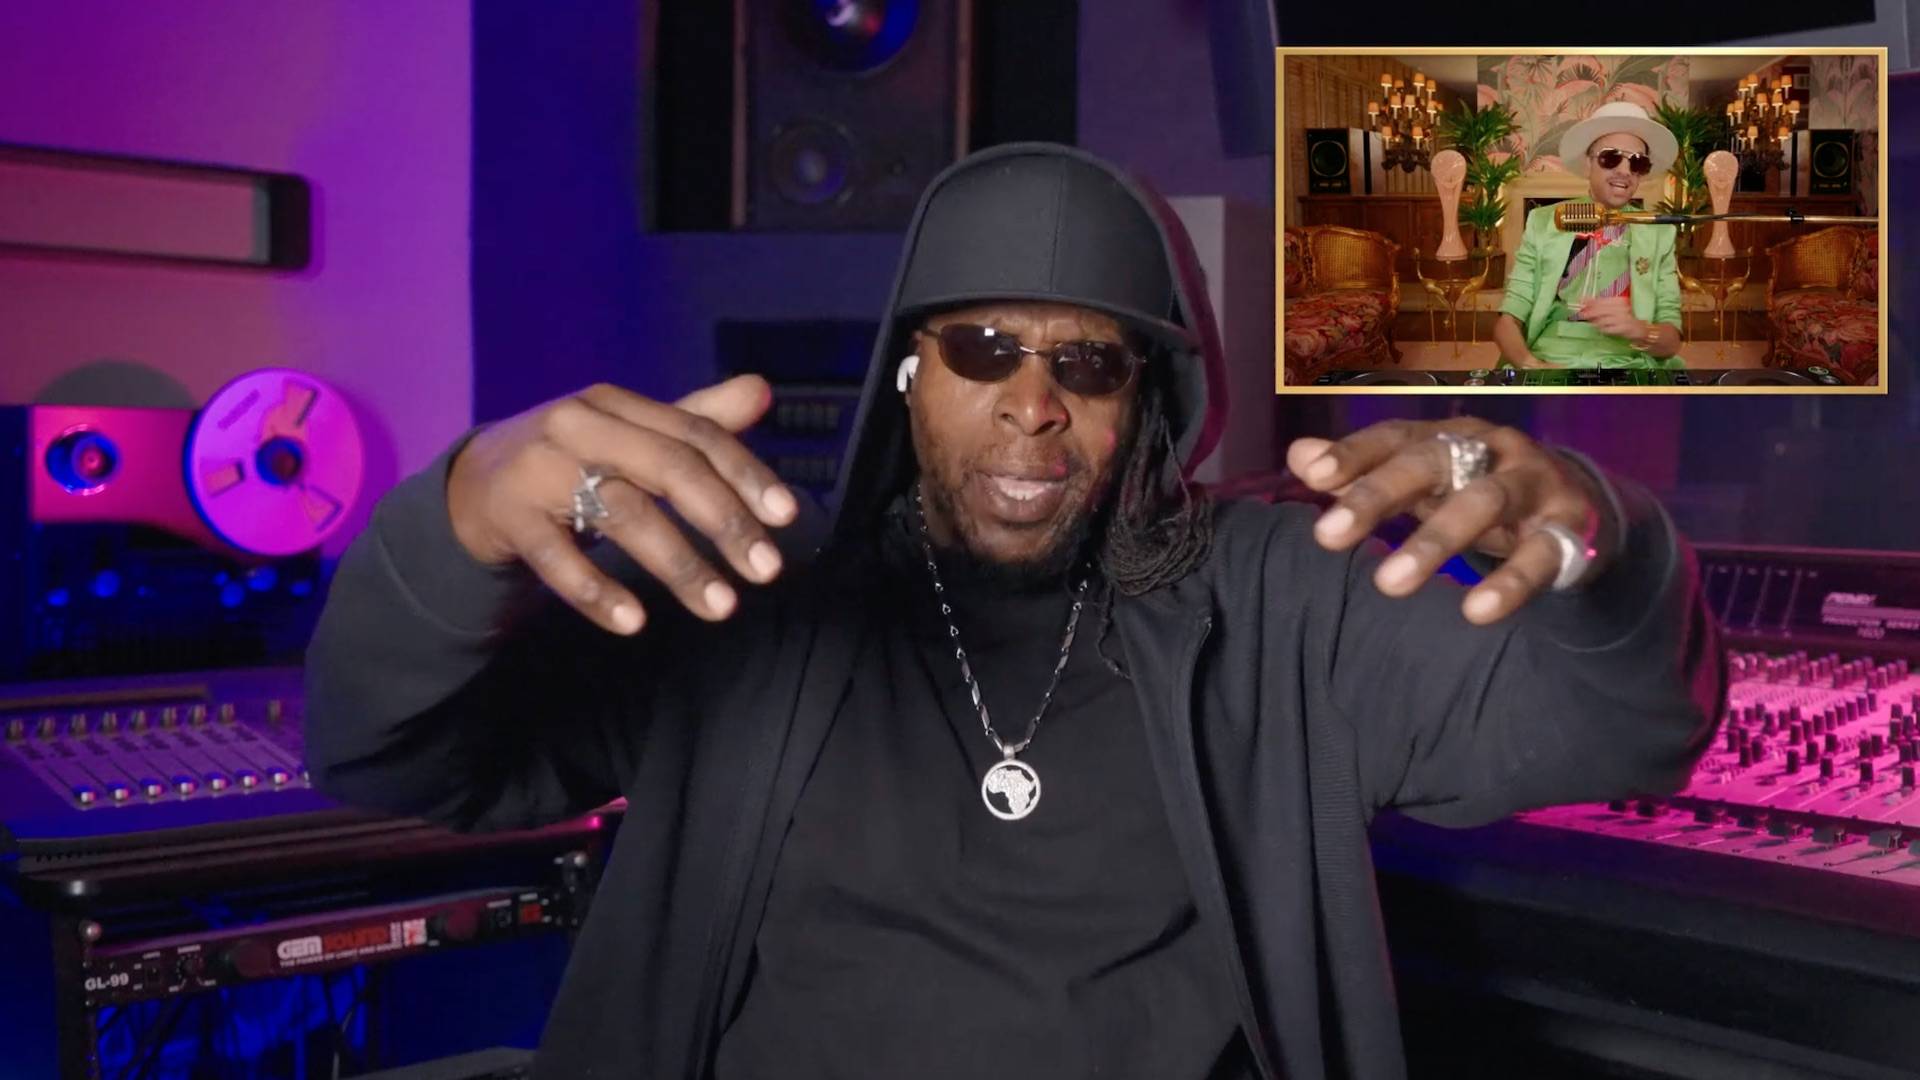 DJ Cassidy welcomes Ini Kamoze to sing "Here Comes the Hotstepper" on DJ Cassidy's Pass The Mic: BET Afterparty 2022.